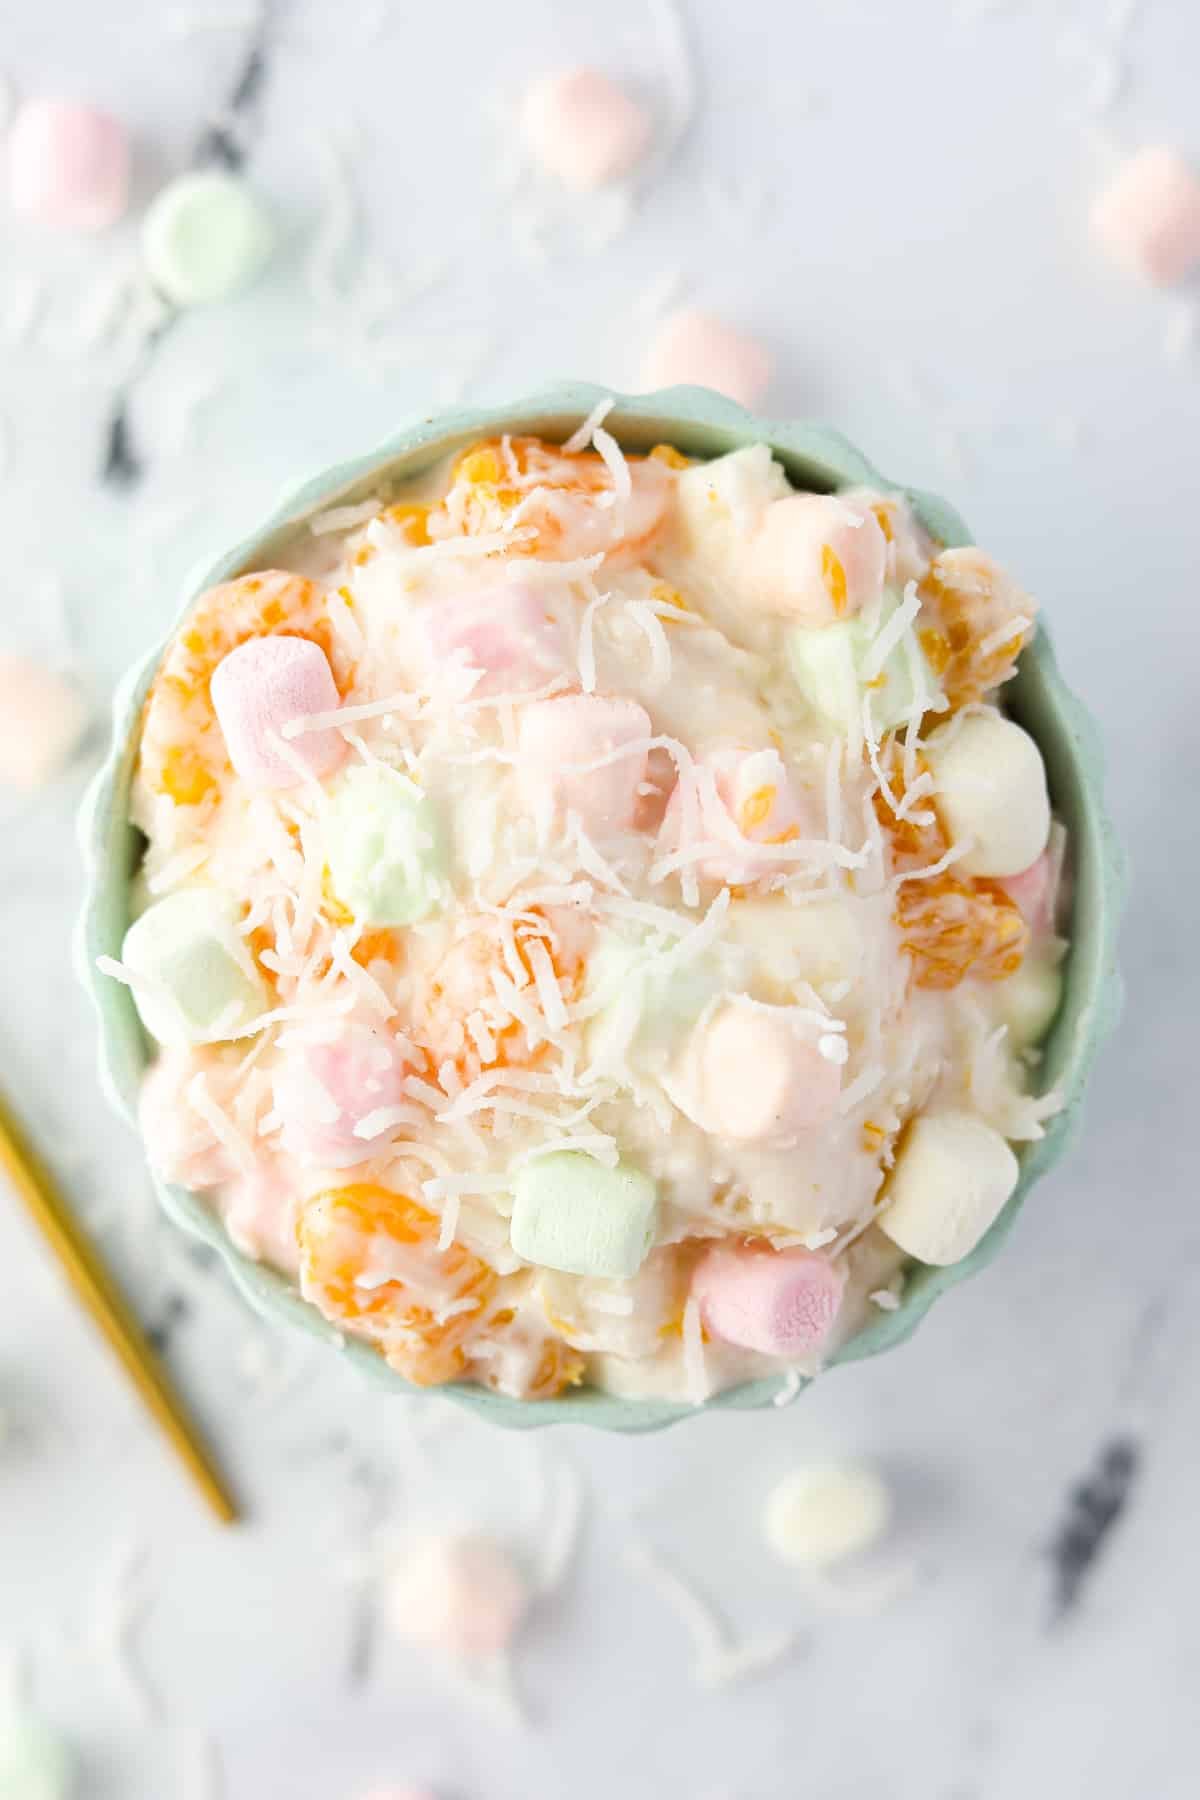 A bowl of marshmallow fruit salad garnished with coconut.